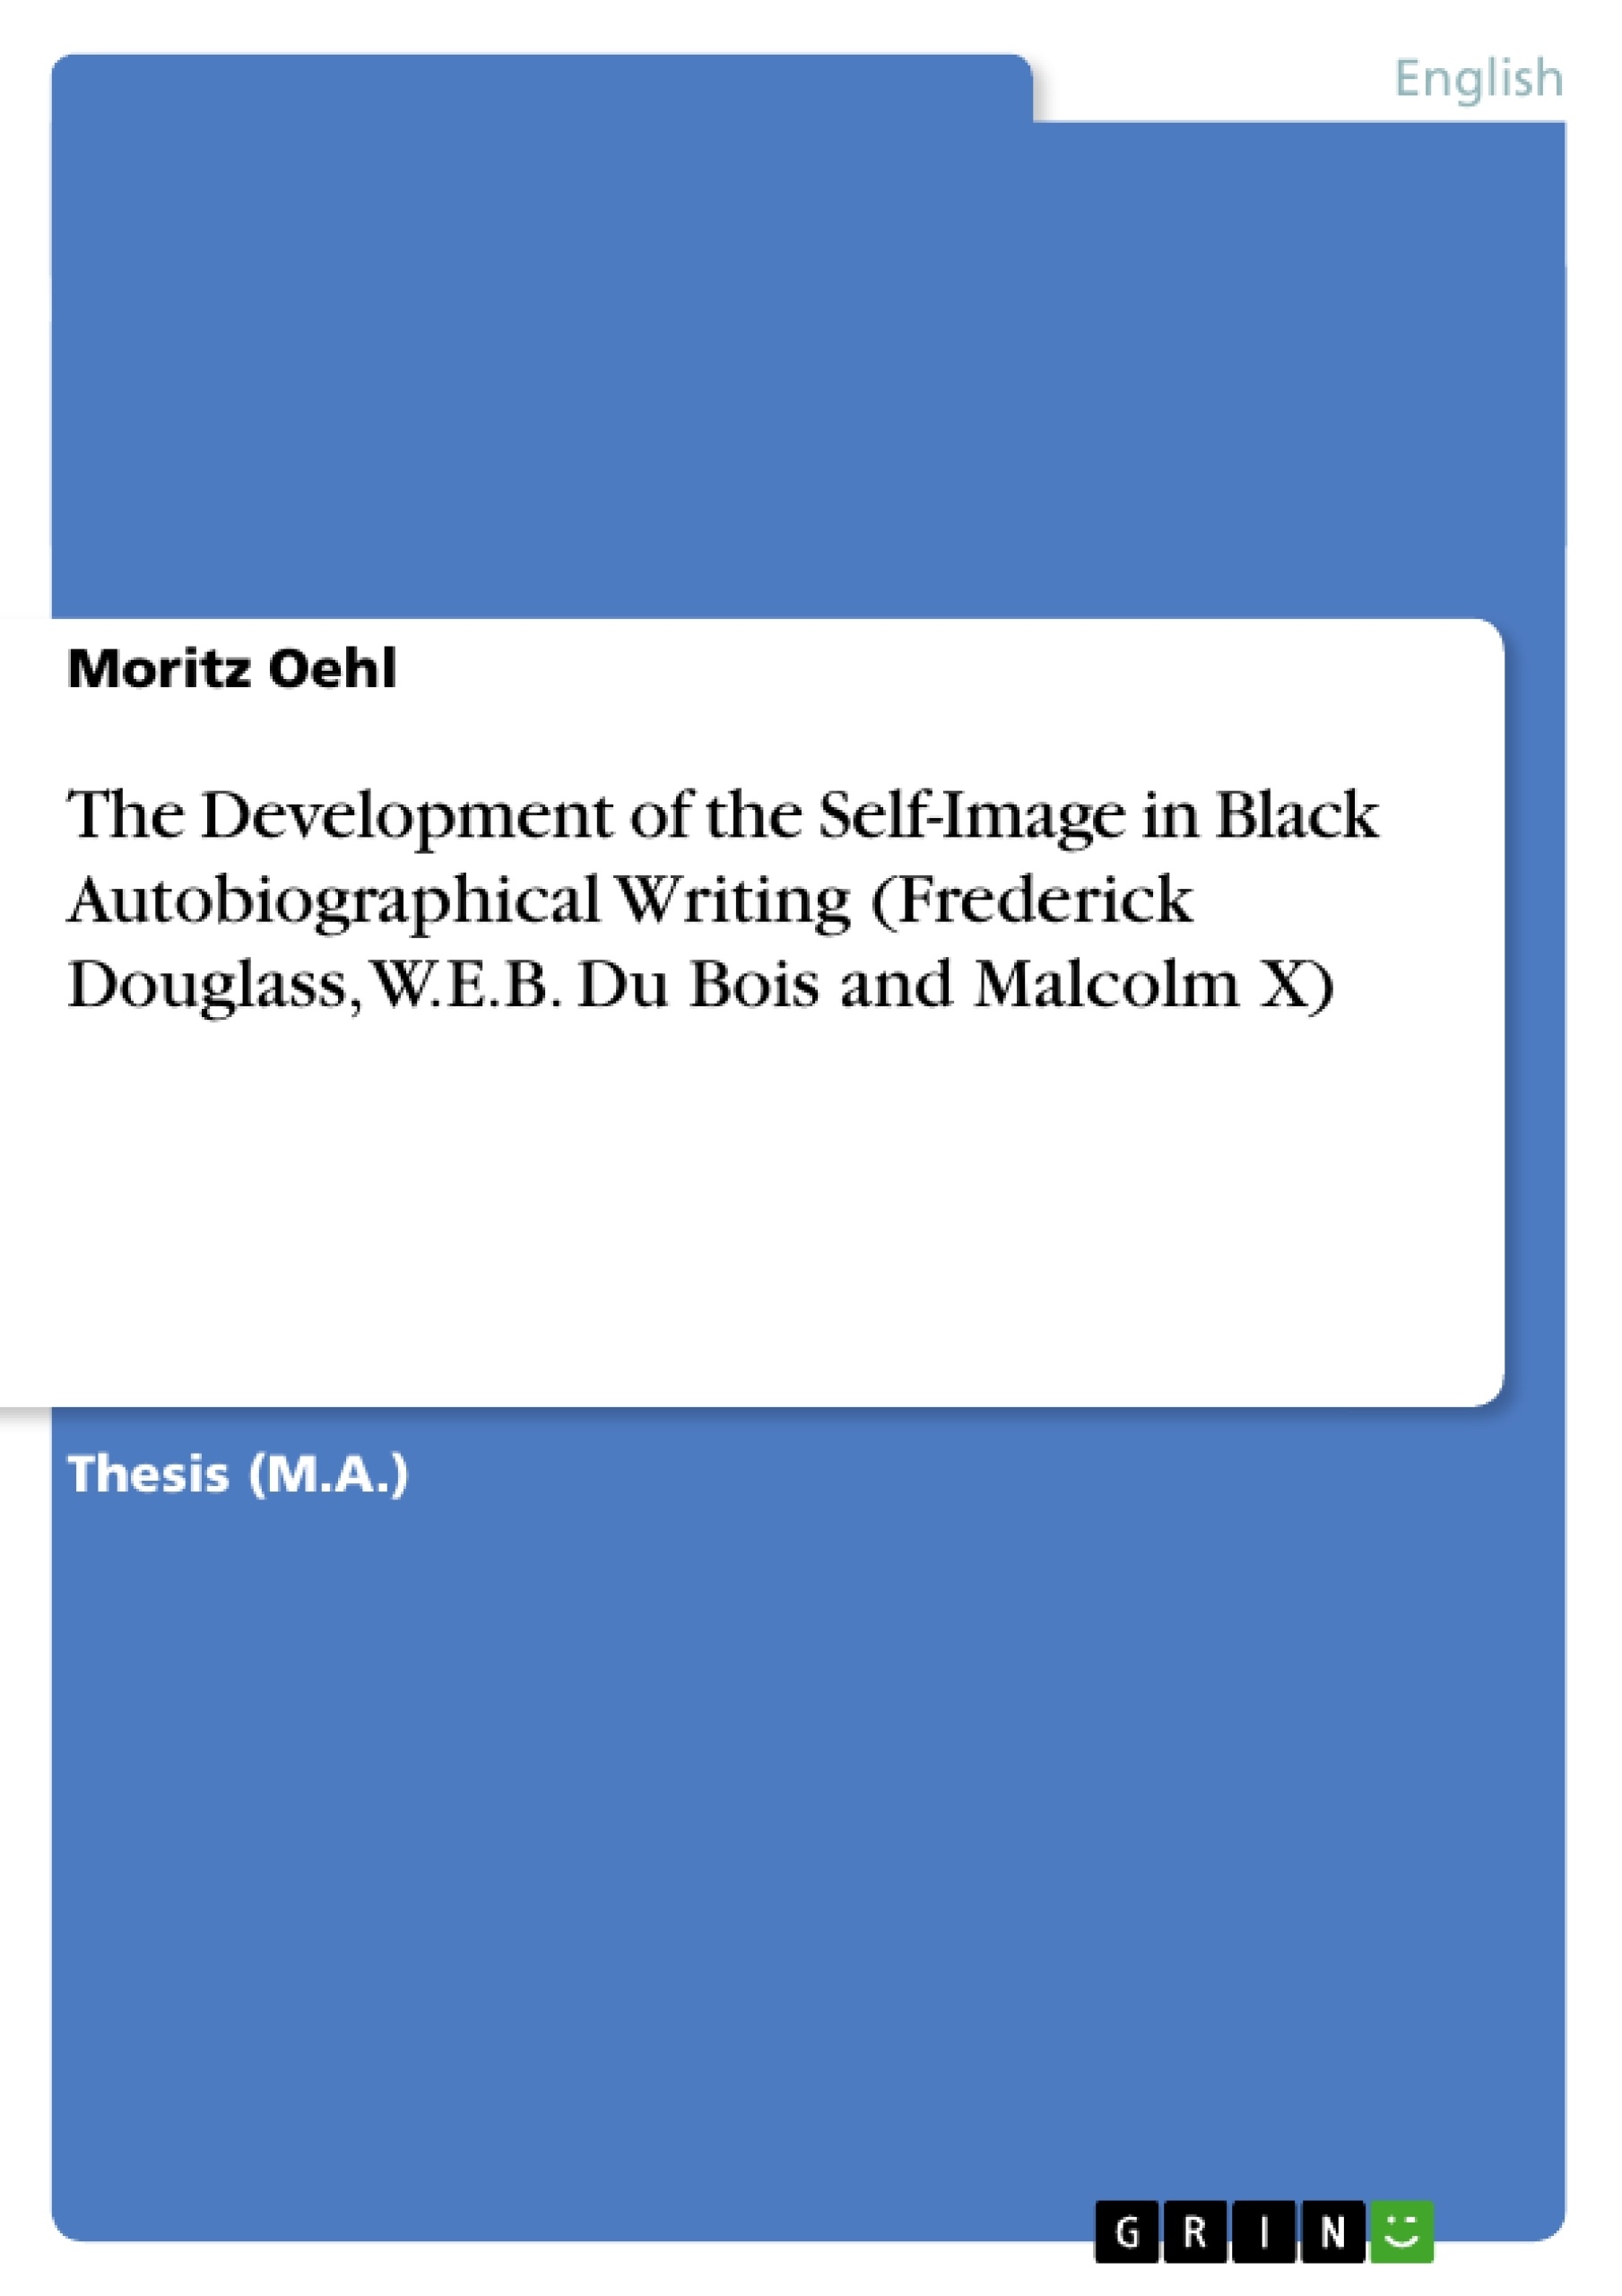 Title: The Development of the Self-Image in Black Autobiographical Writing (Frederick Douglass, W.E.B. Du Bois and Malcolm X)